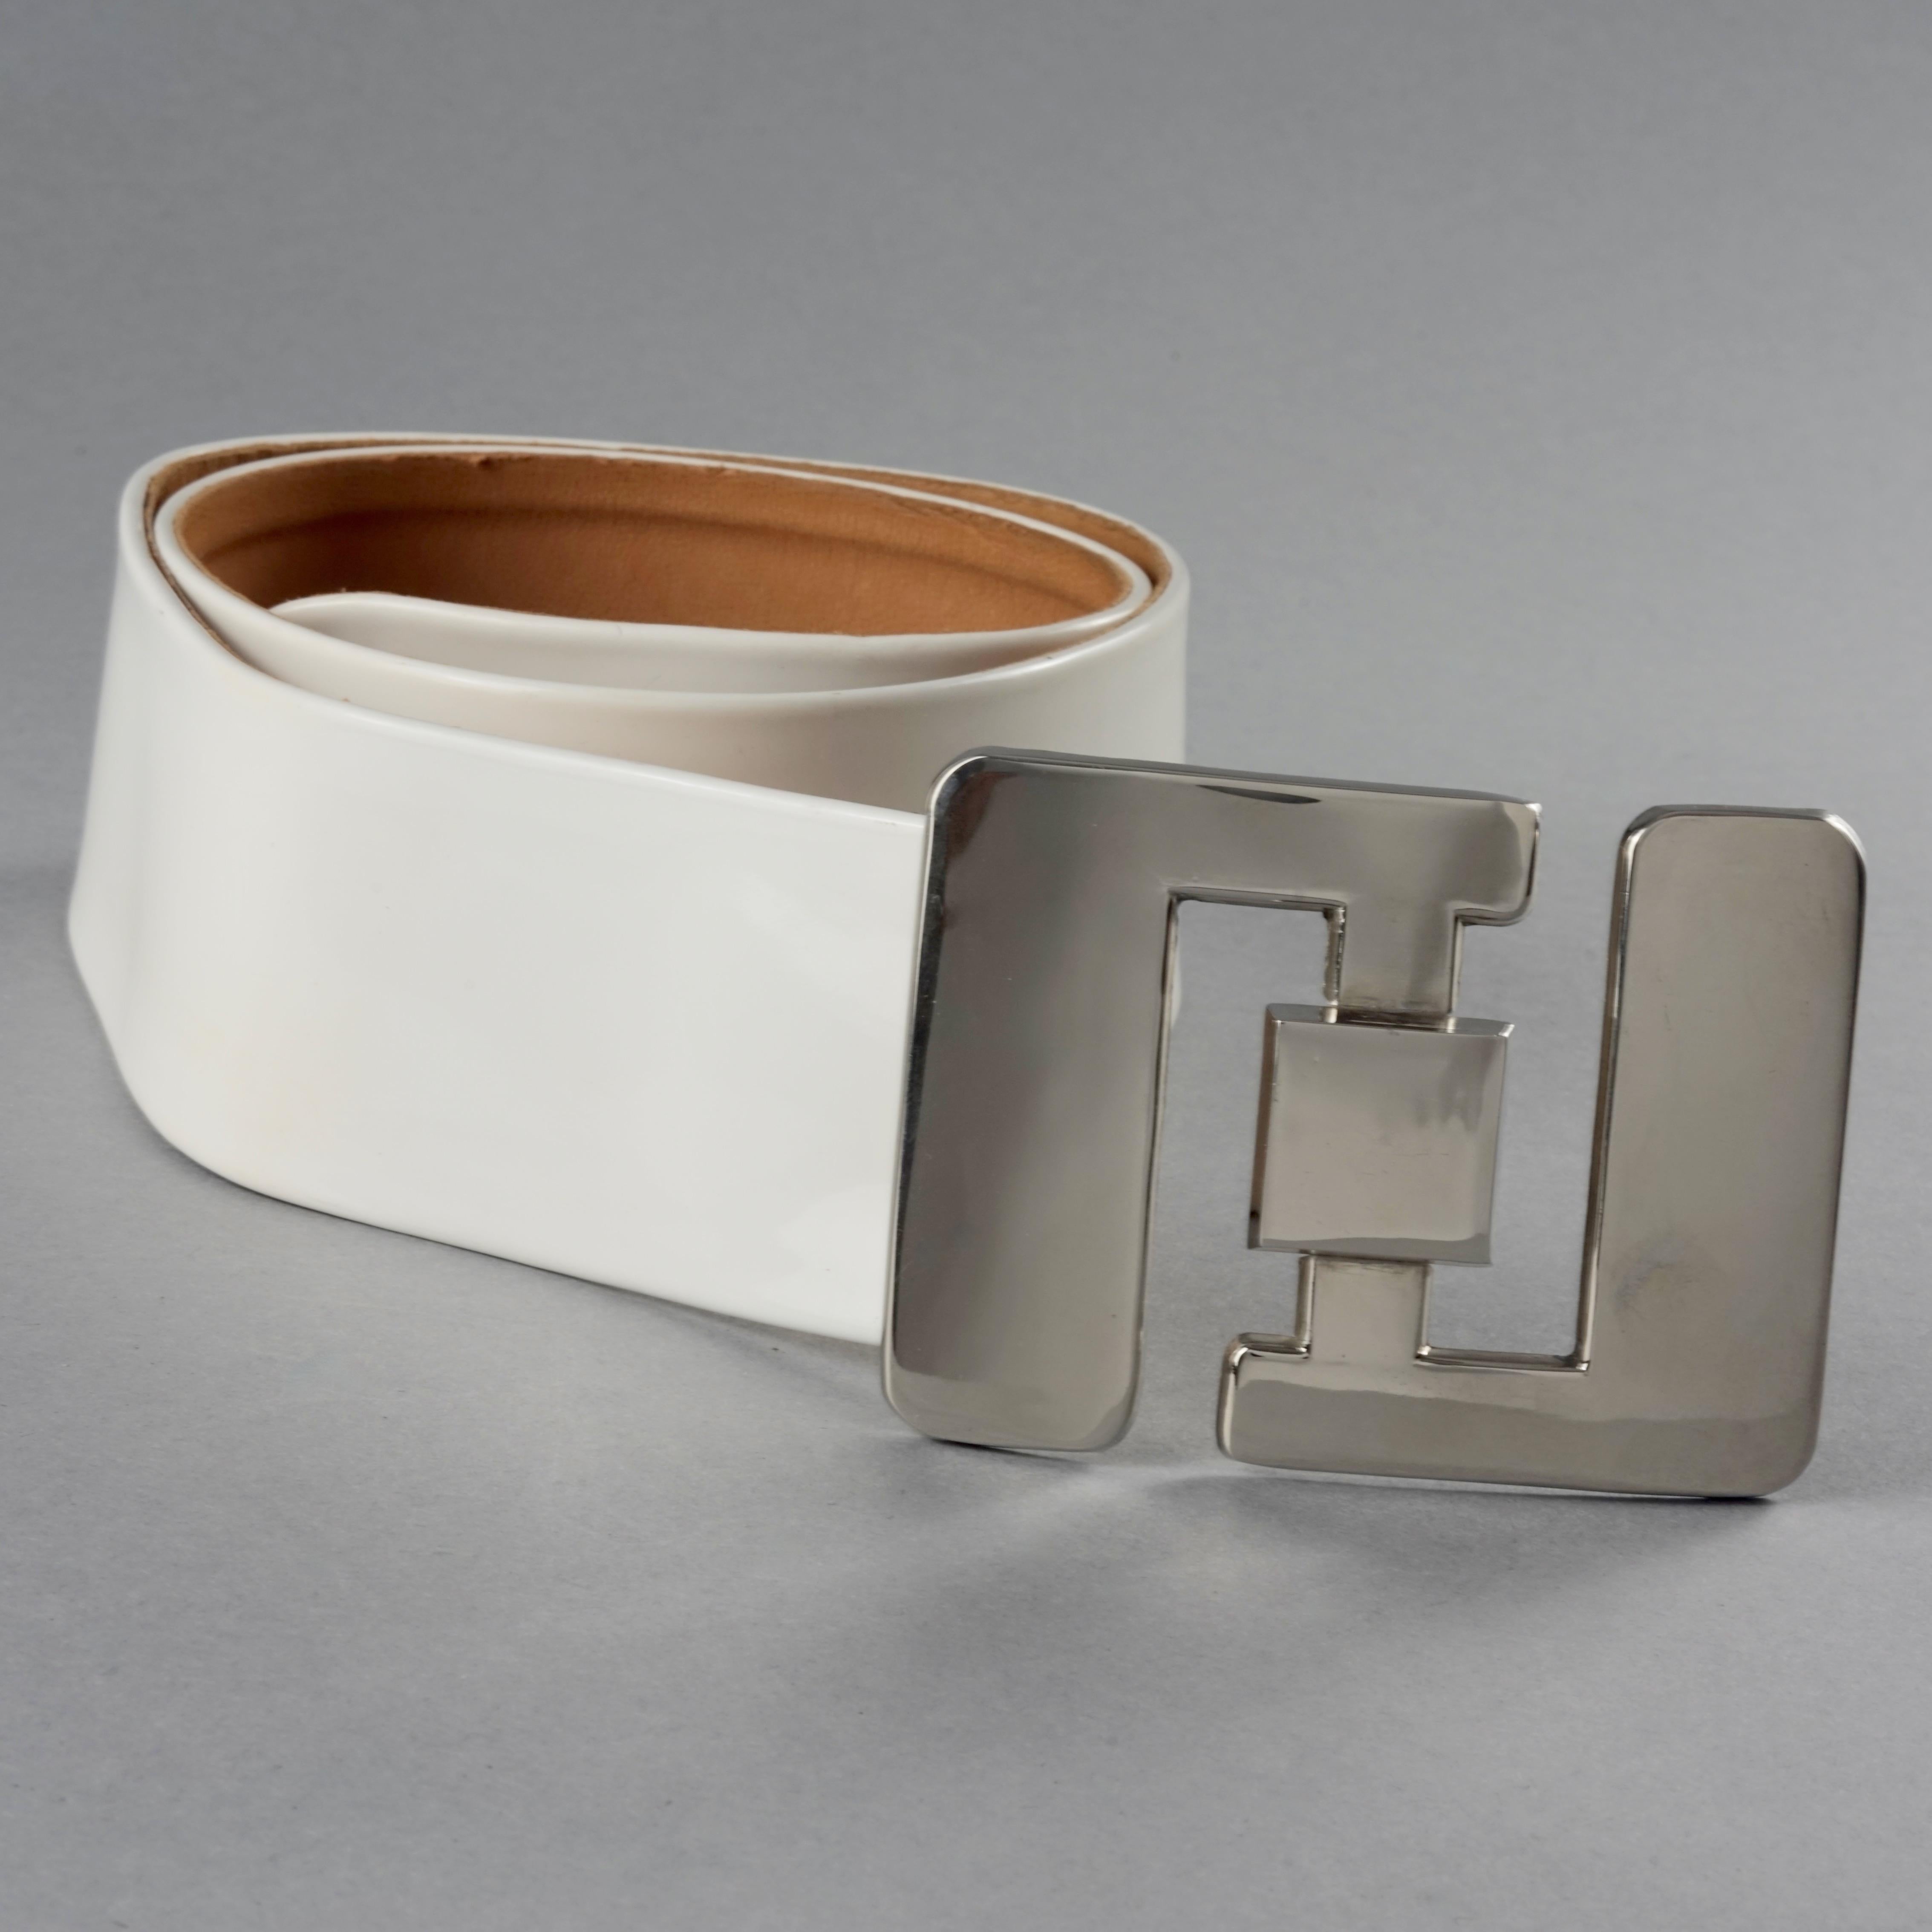 Vintage PIERRE CARDIN Logo Buckle Space Age White Patent Belt In Fair Condition For Sale In Kingersheim, Alsace